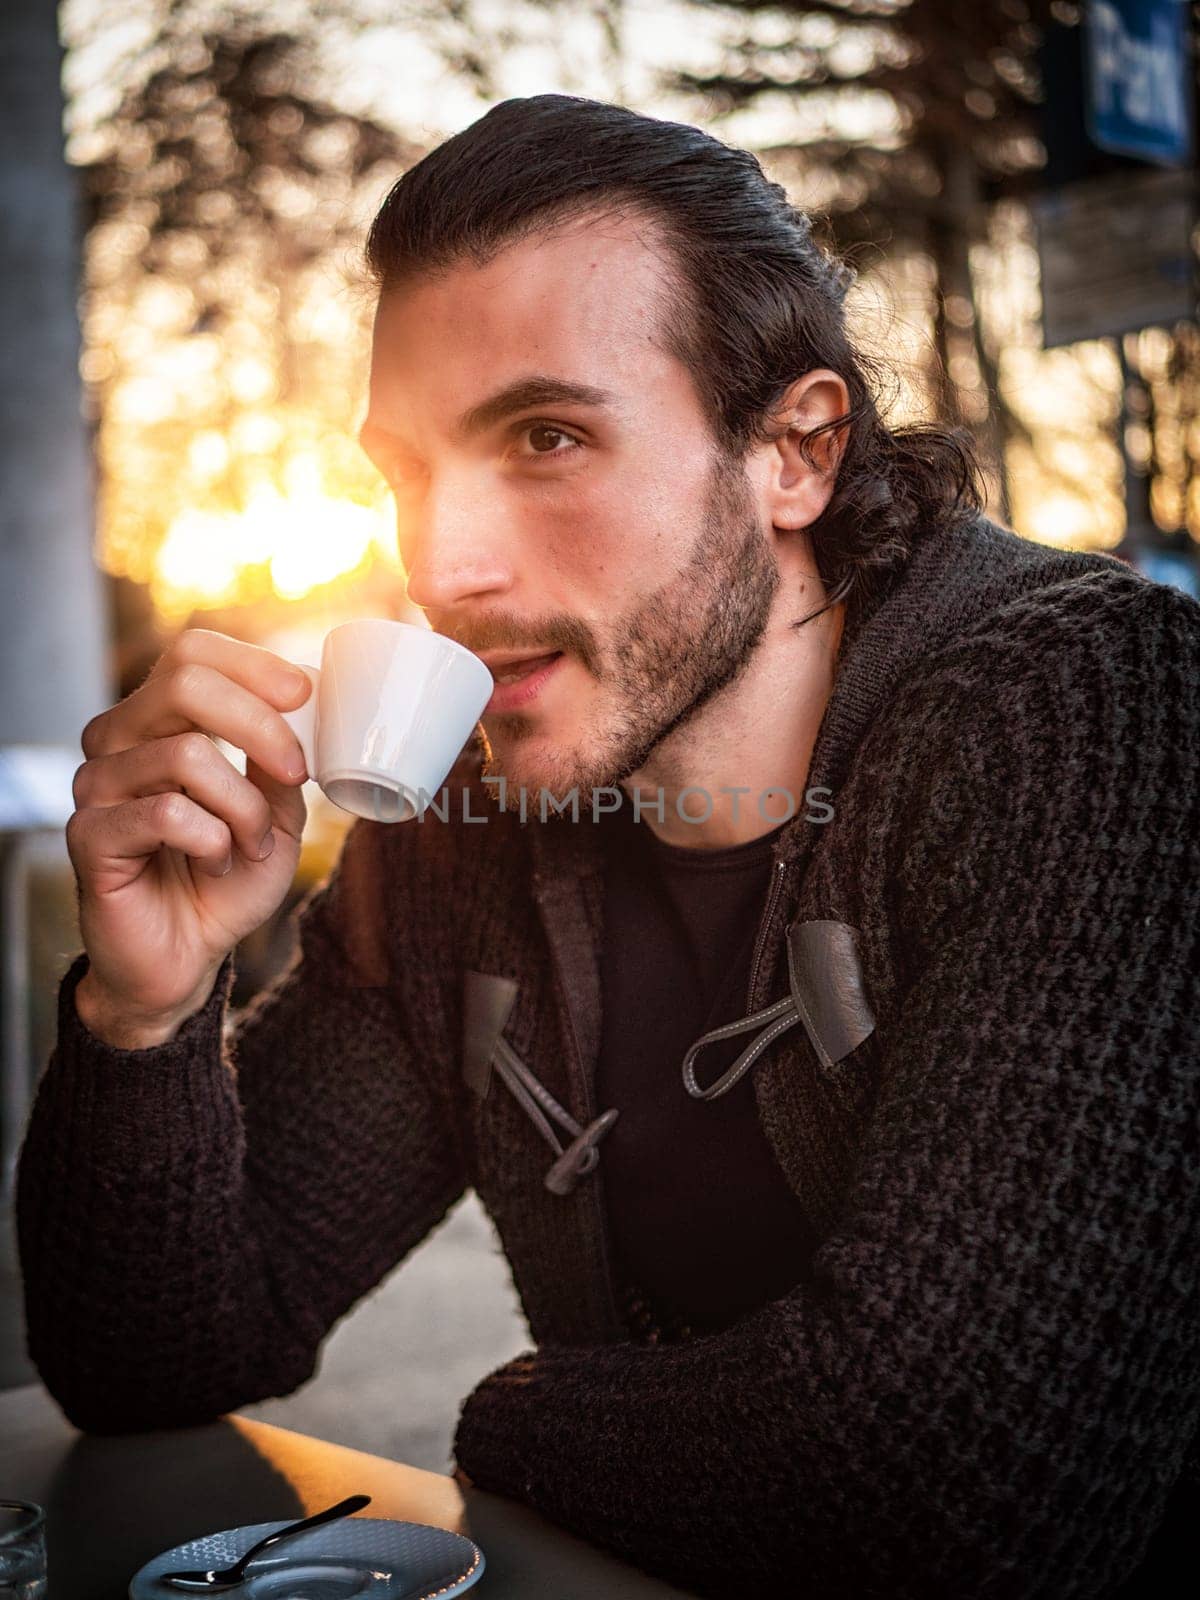 One handsome young man drinking espresso coffee in urban setting in European city by artofphoto